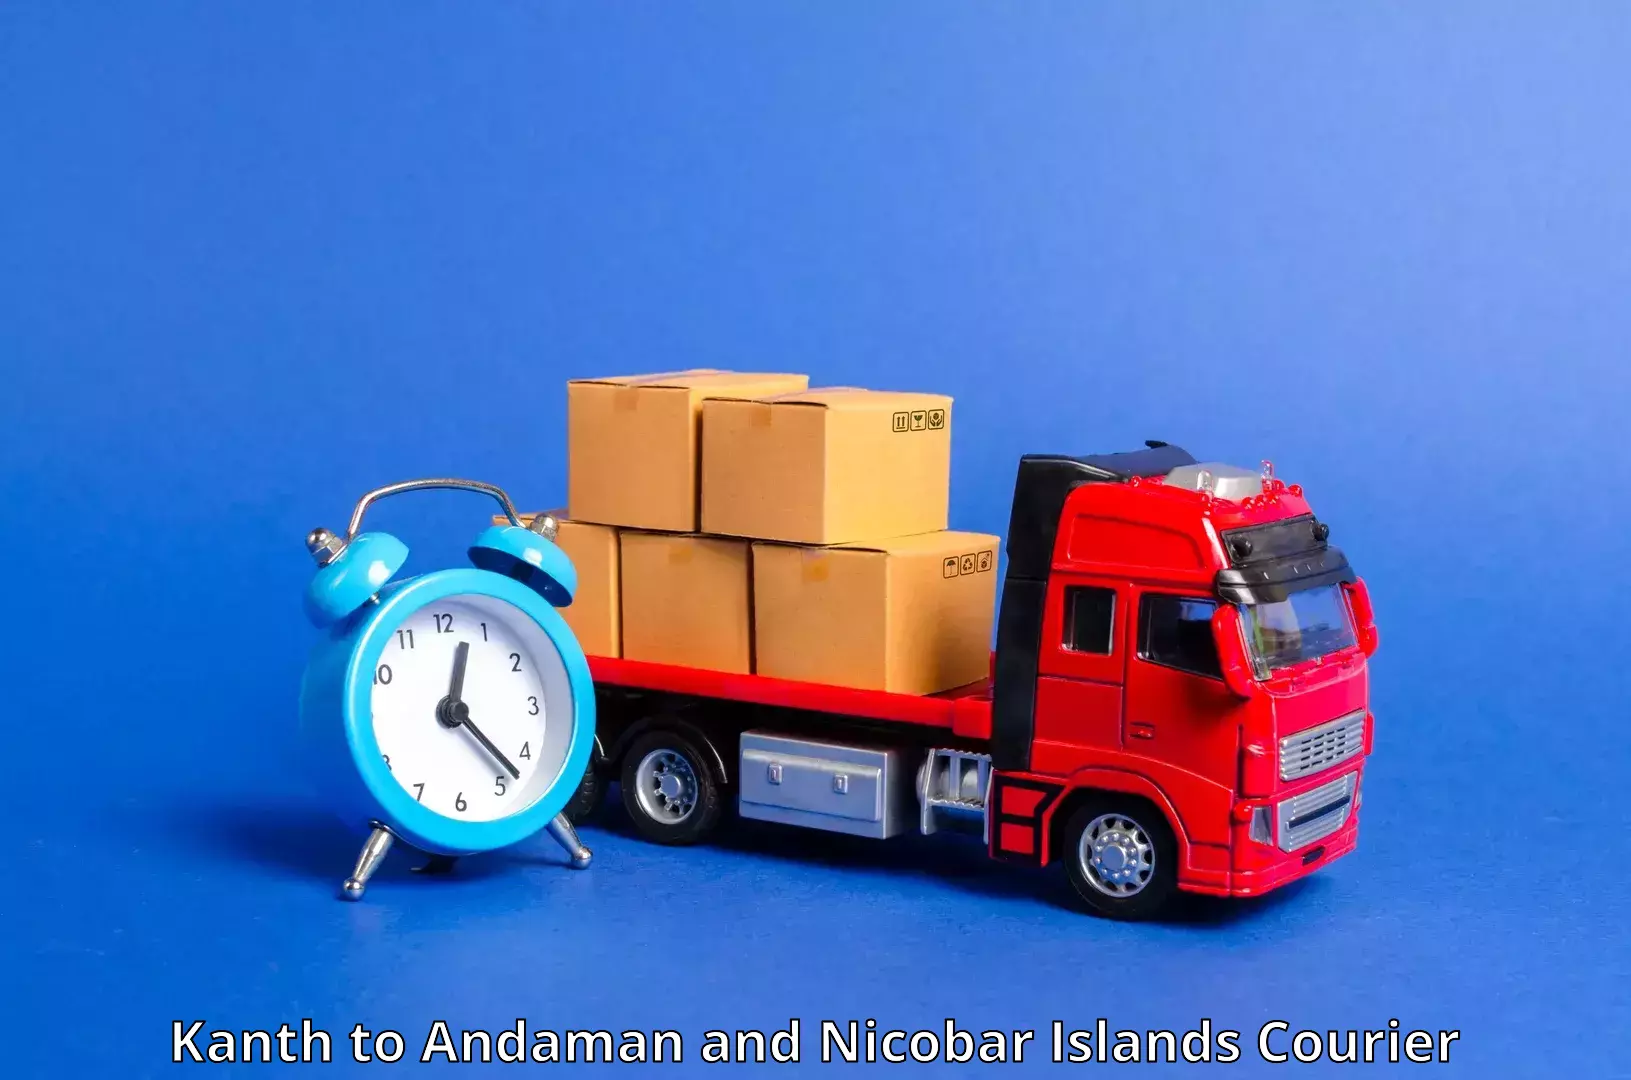 Weekend courier service Kanth to Andaman and Nicobar Islands